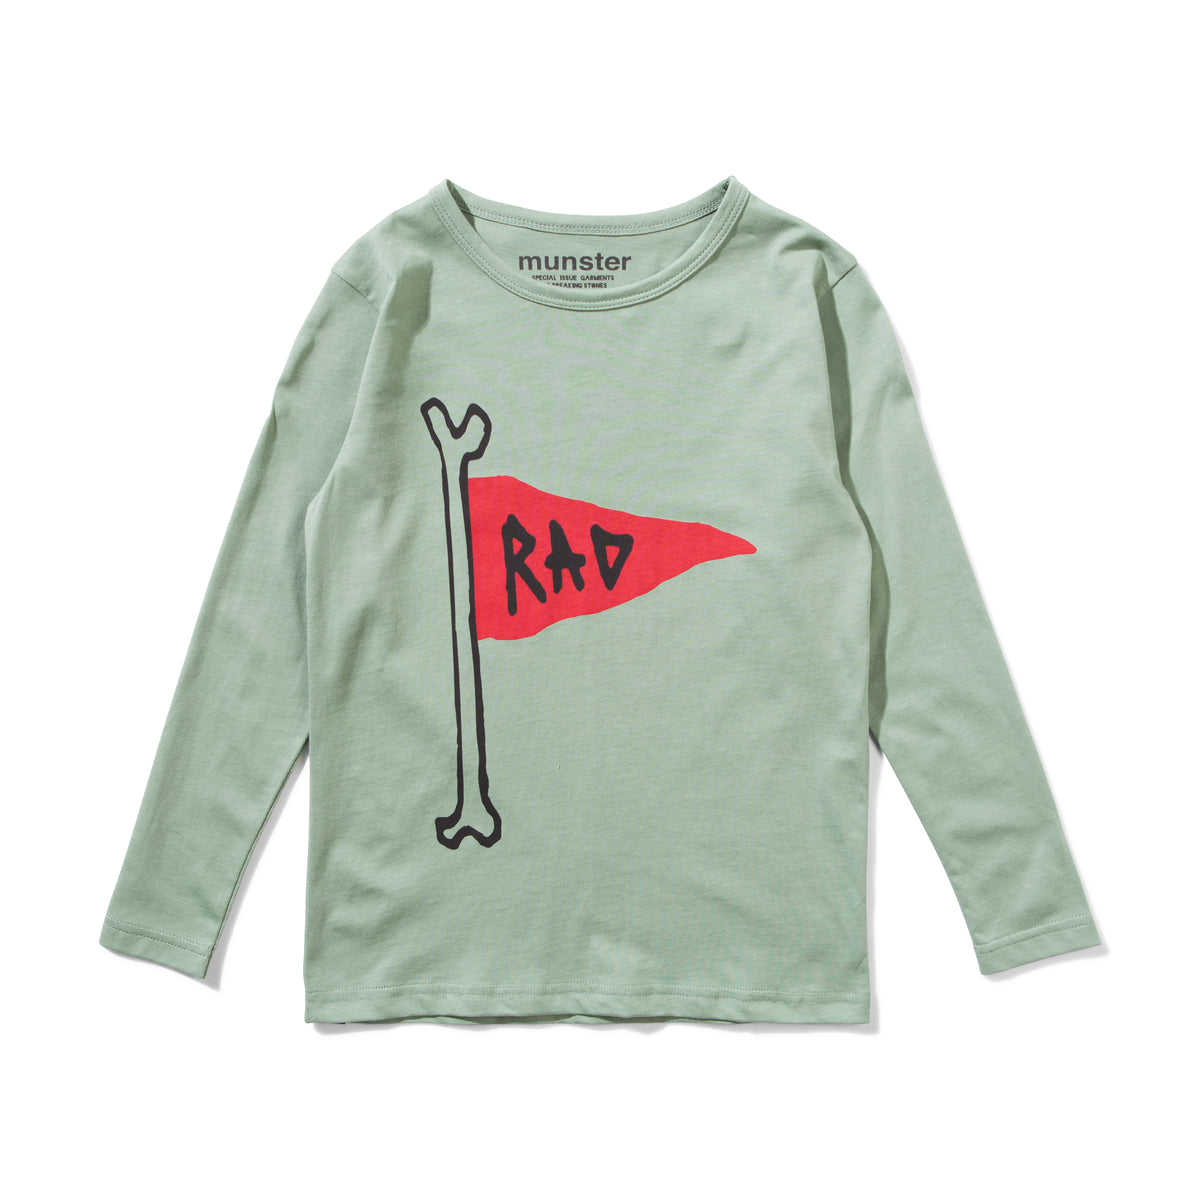 Munster Kids - Flag Pole L/S Tee in Shale Green